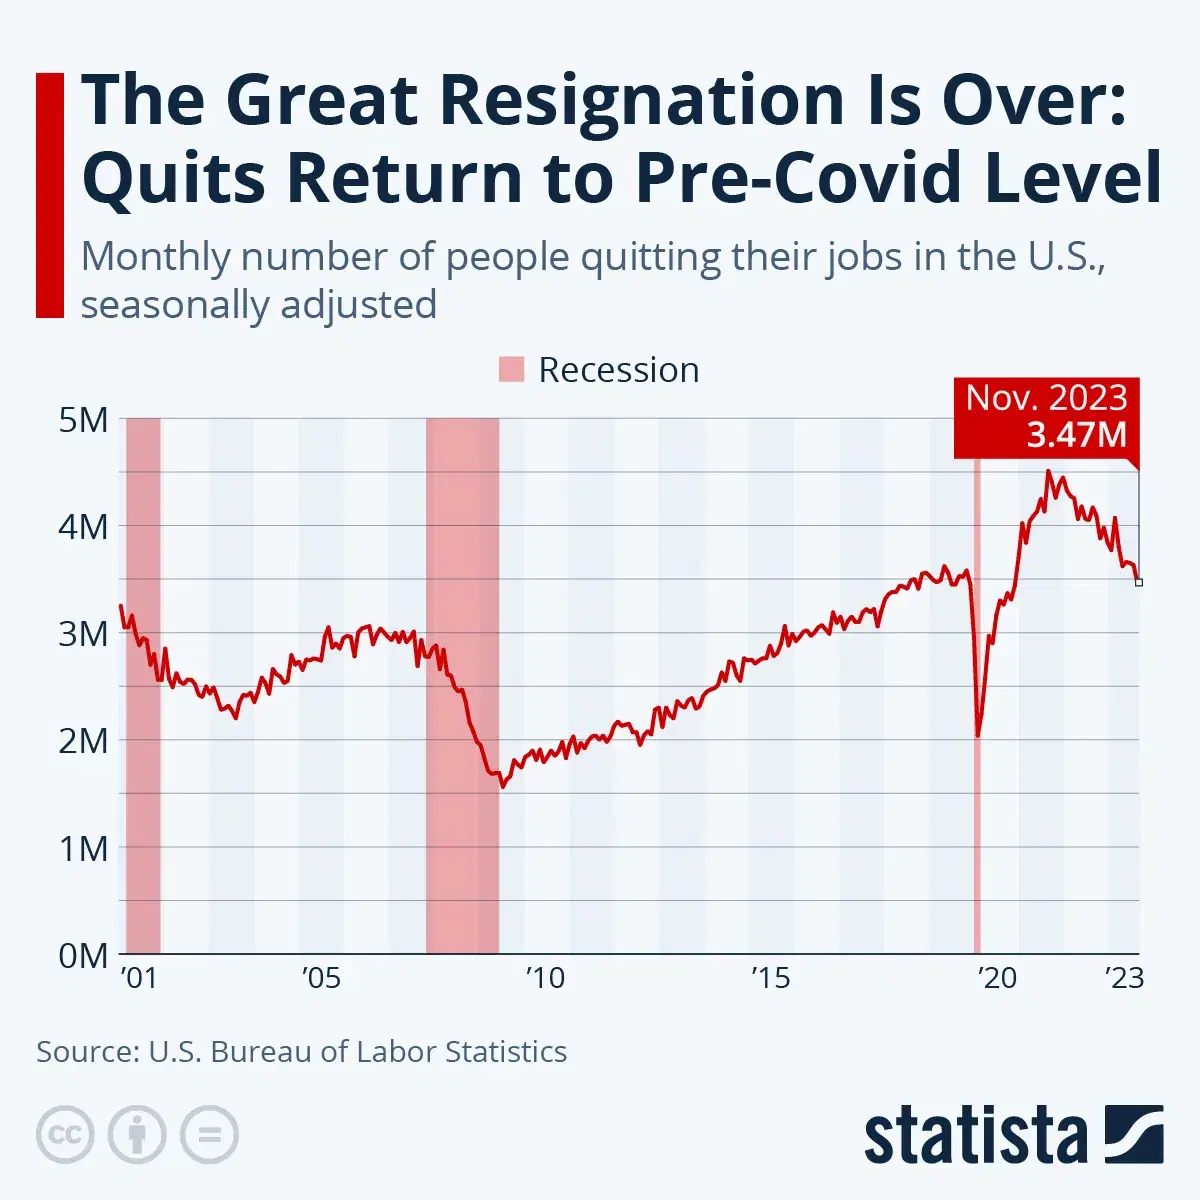 The Great Resignation Is Over: Quits Return to Pre-Covid Level